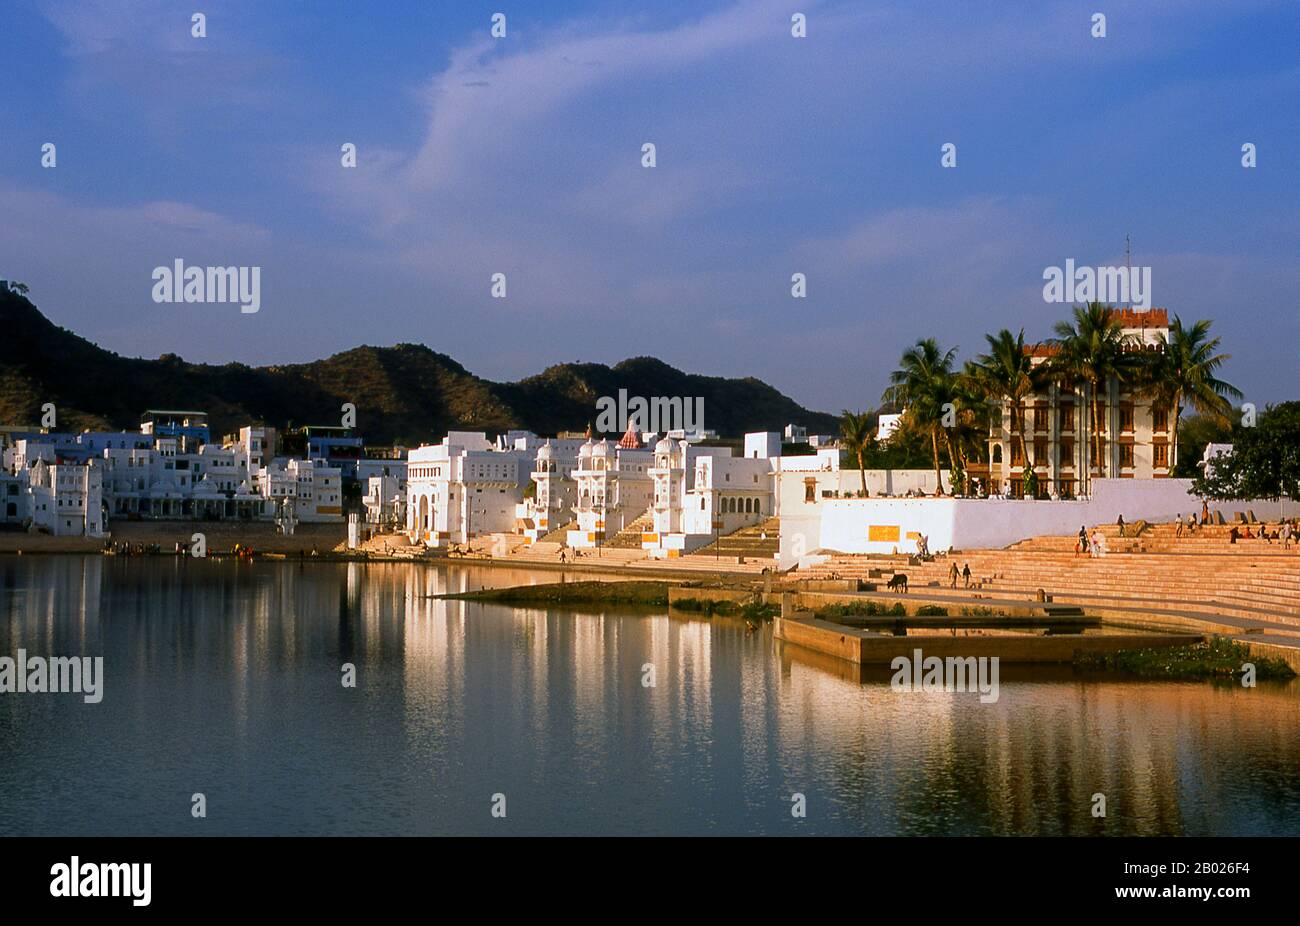 Pushkar is one of India's oldest cities. The date of its actual founding is not known, but legend associates Lord Brahma with its creation.  According to the Rajputana Gazetteer, Pushkar was held by Chechi Gurjars (Gujjars) till about 700 years ago. Later Some shrines were occupied by Kanphati Jogis. There are still some priests from the Gujar community in some of Pushkar's temples. They are known as Bhopas.  The sage Parasara is said to have been born in Pushkar. His descendants, called Parasara Brahamanas, are found in Pushkar and the surrounding area. The famous temple of Jeenmata has been Stock Photo